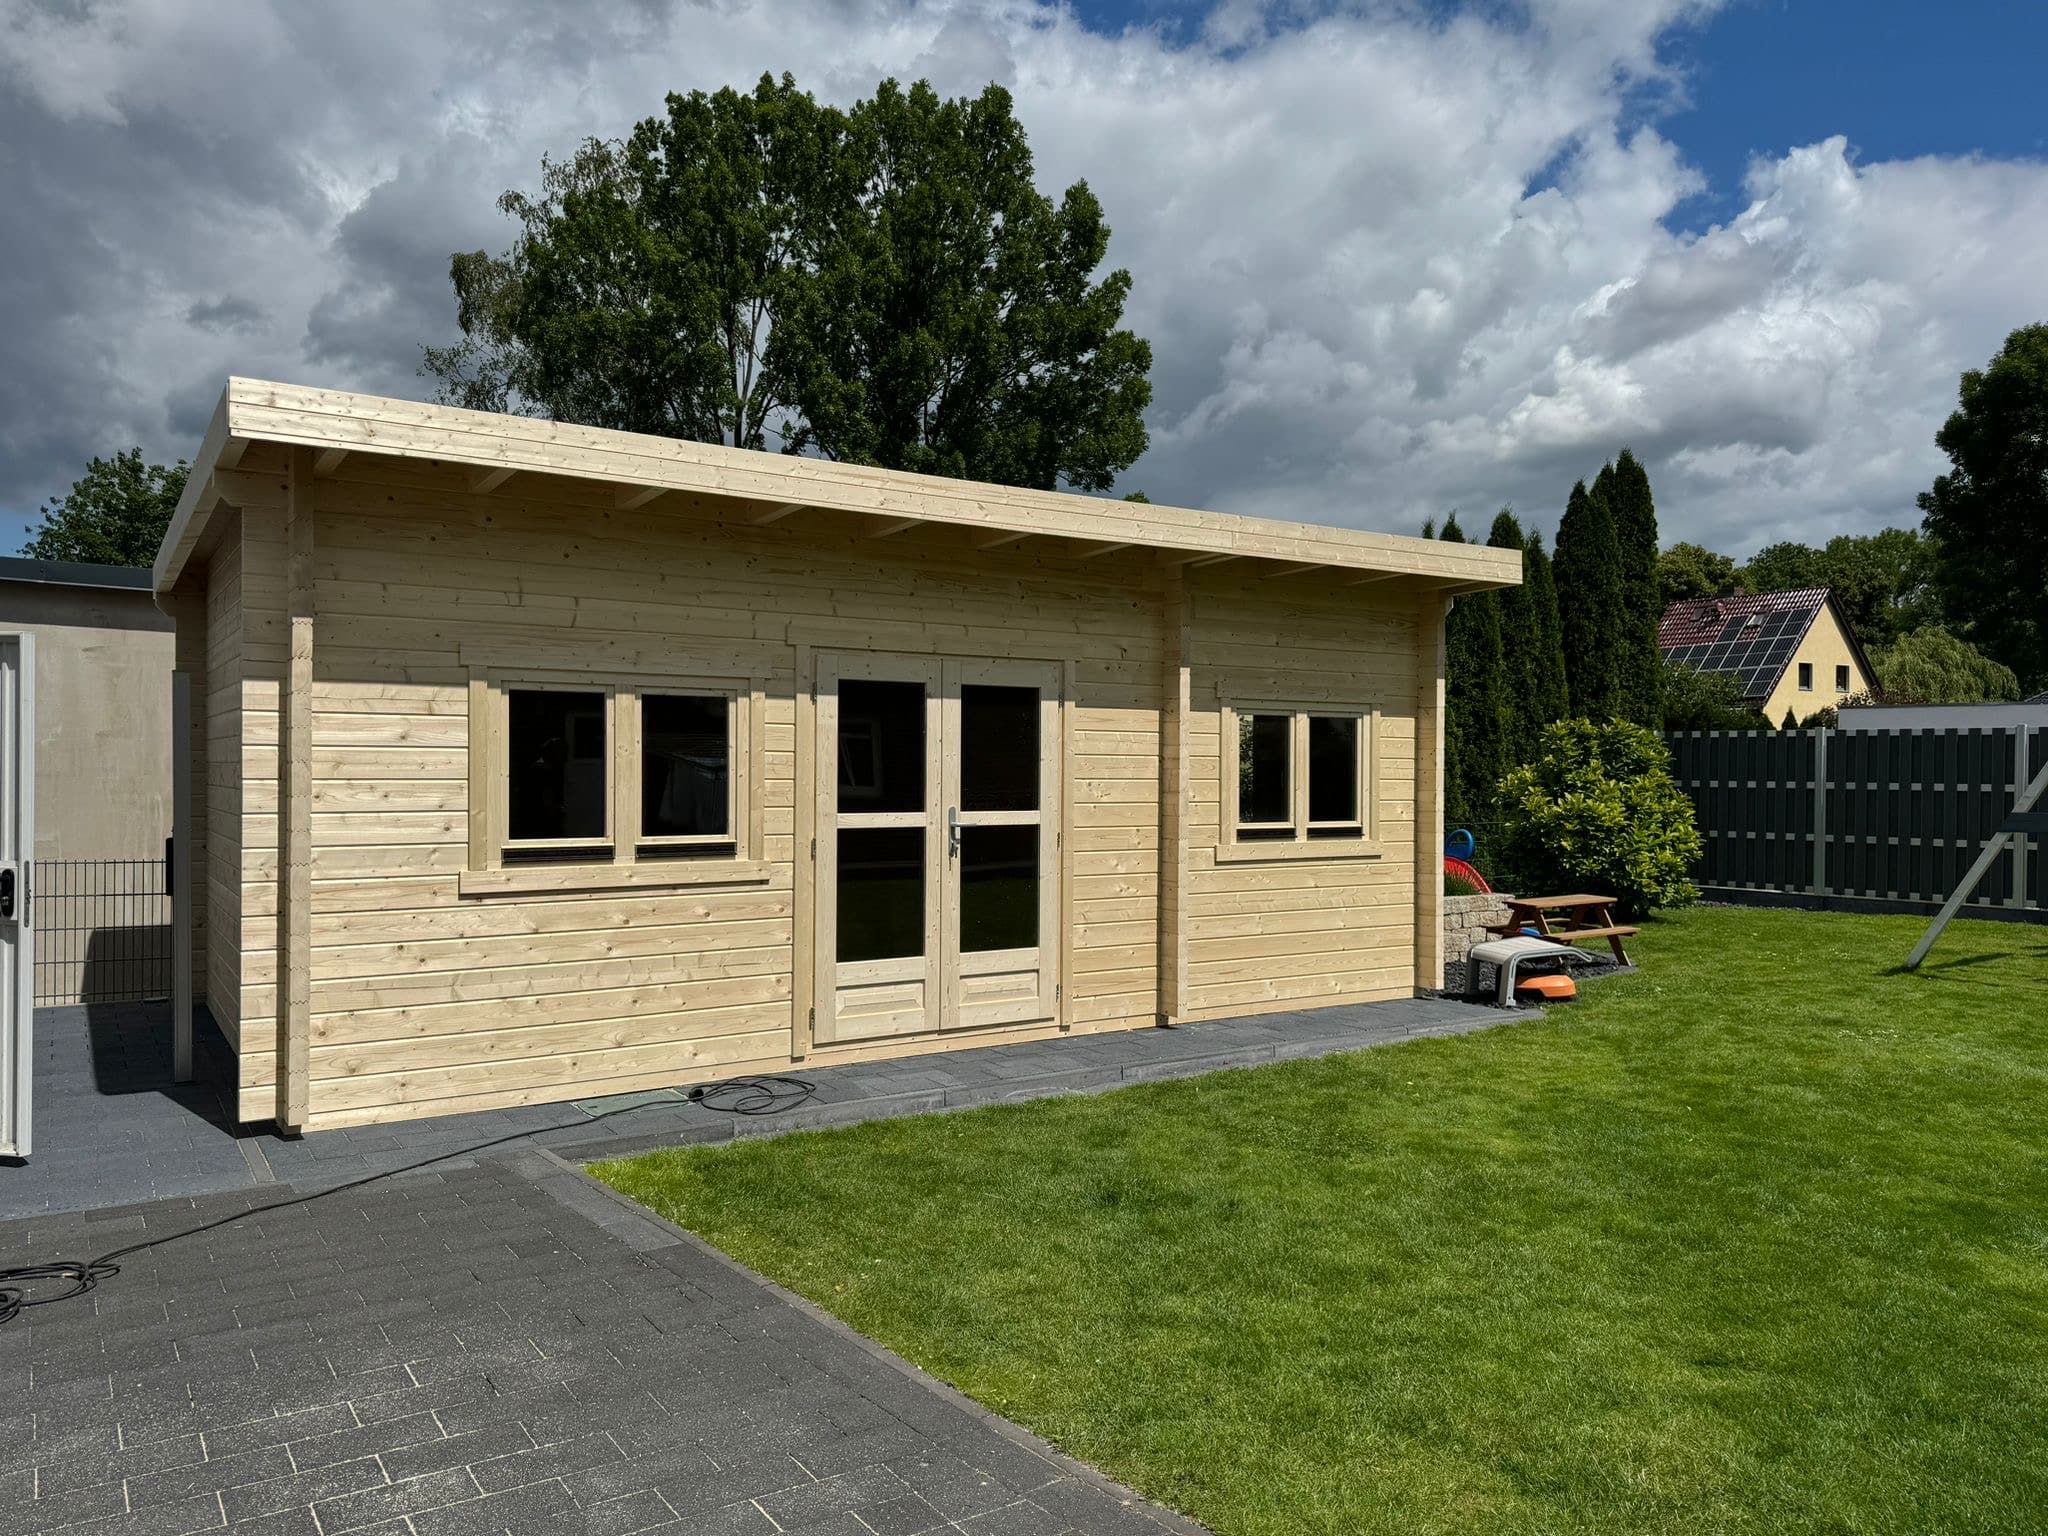 A wooden single-pitched roof house with double doors and two windows on each side stands on a paved area surrounded by a green lawn. Trees, a fence and part of a house can be seen in the background. The sky is partly cloudy. This 6500 x 3700 structure has durable, 70 mm thick walls for added stability.